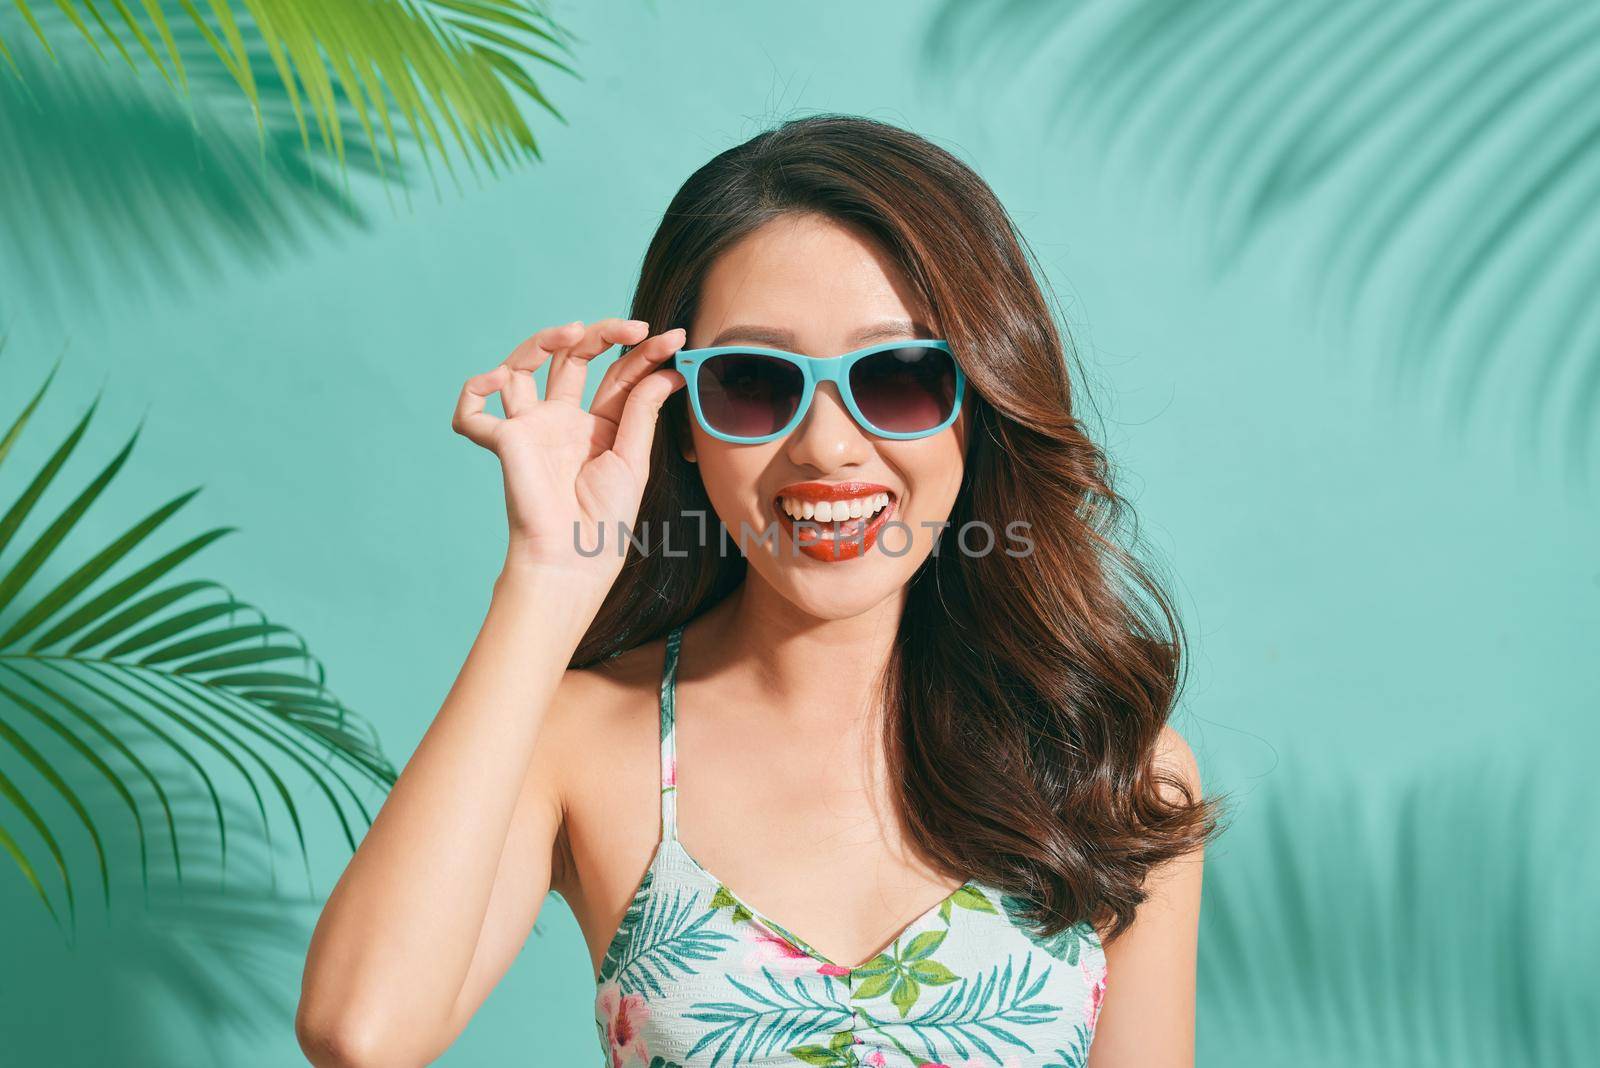 Asian young woman wearing a bikini and sunglasses having fun on blue background by makidotvn